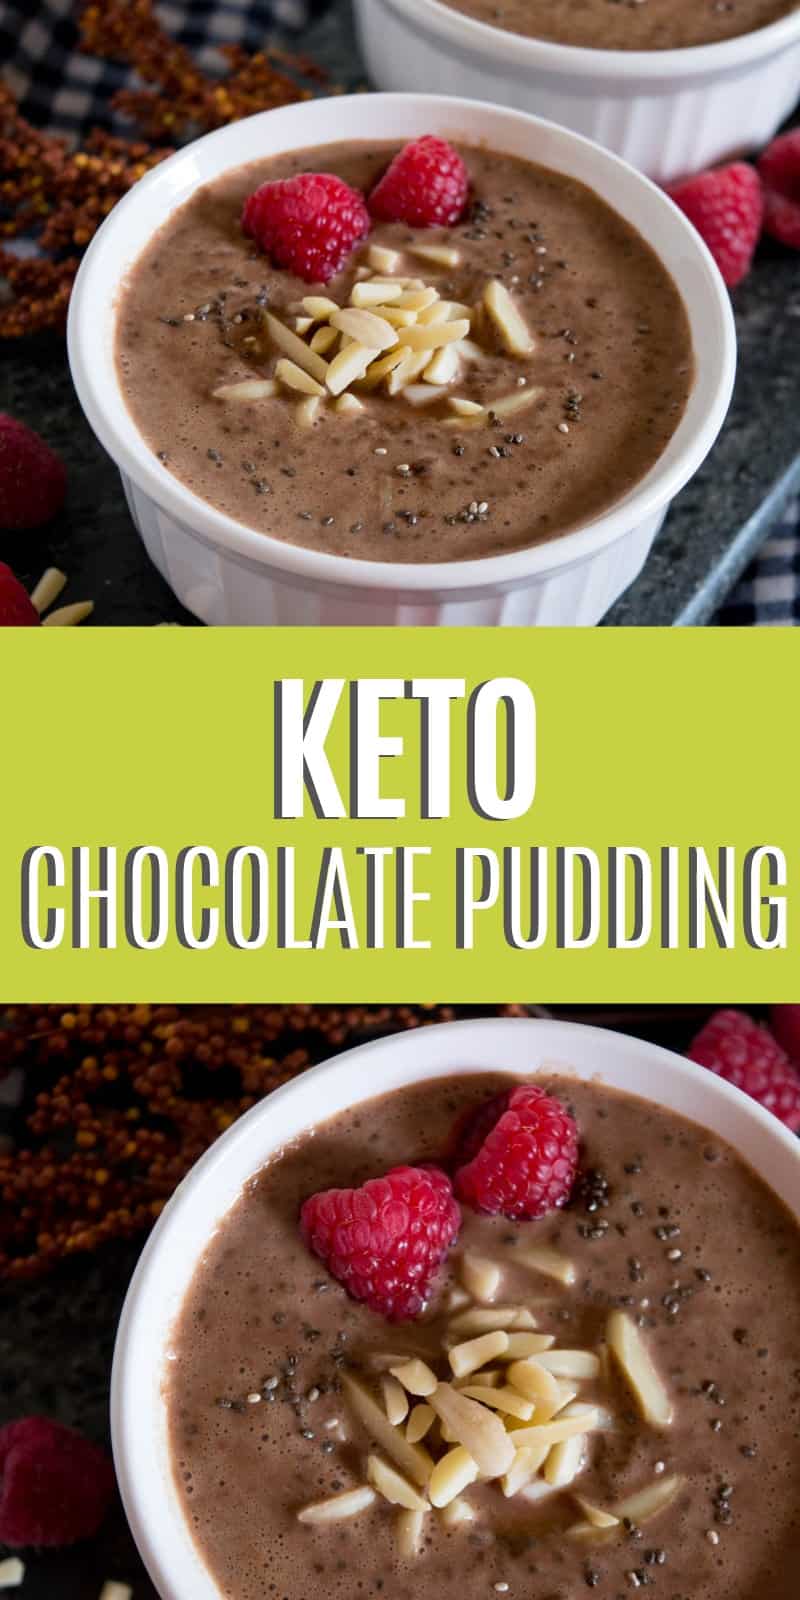 If you are looking for a sweet treat without the loaded carbs, you are going to love this keto chocolate pudding with chia seeds!